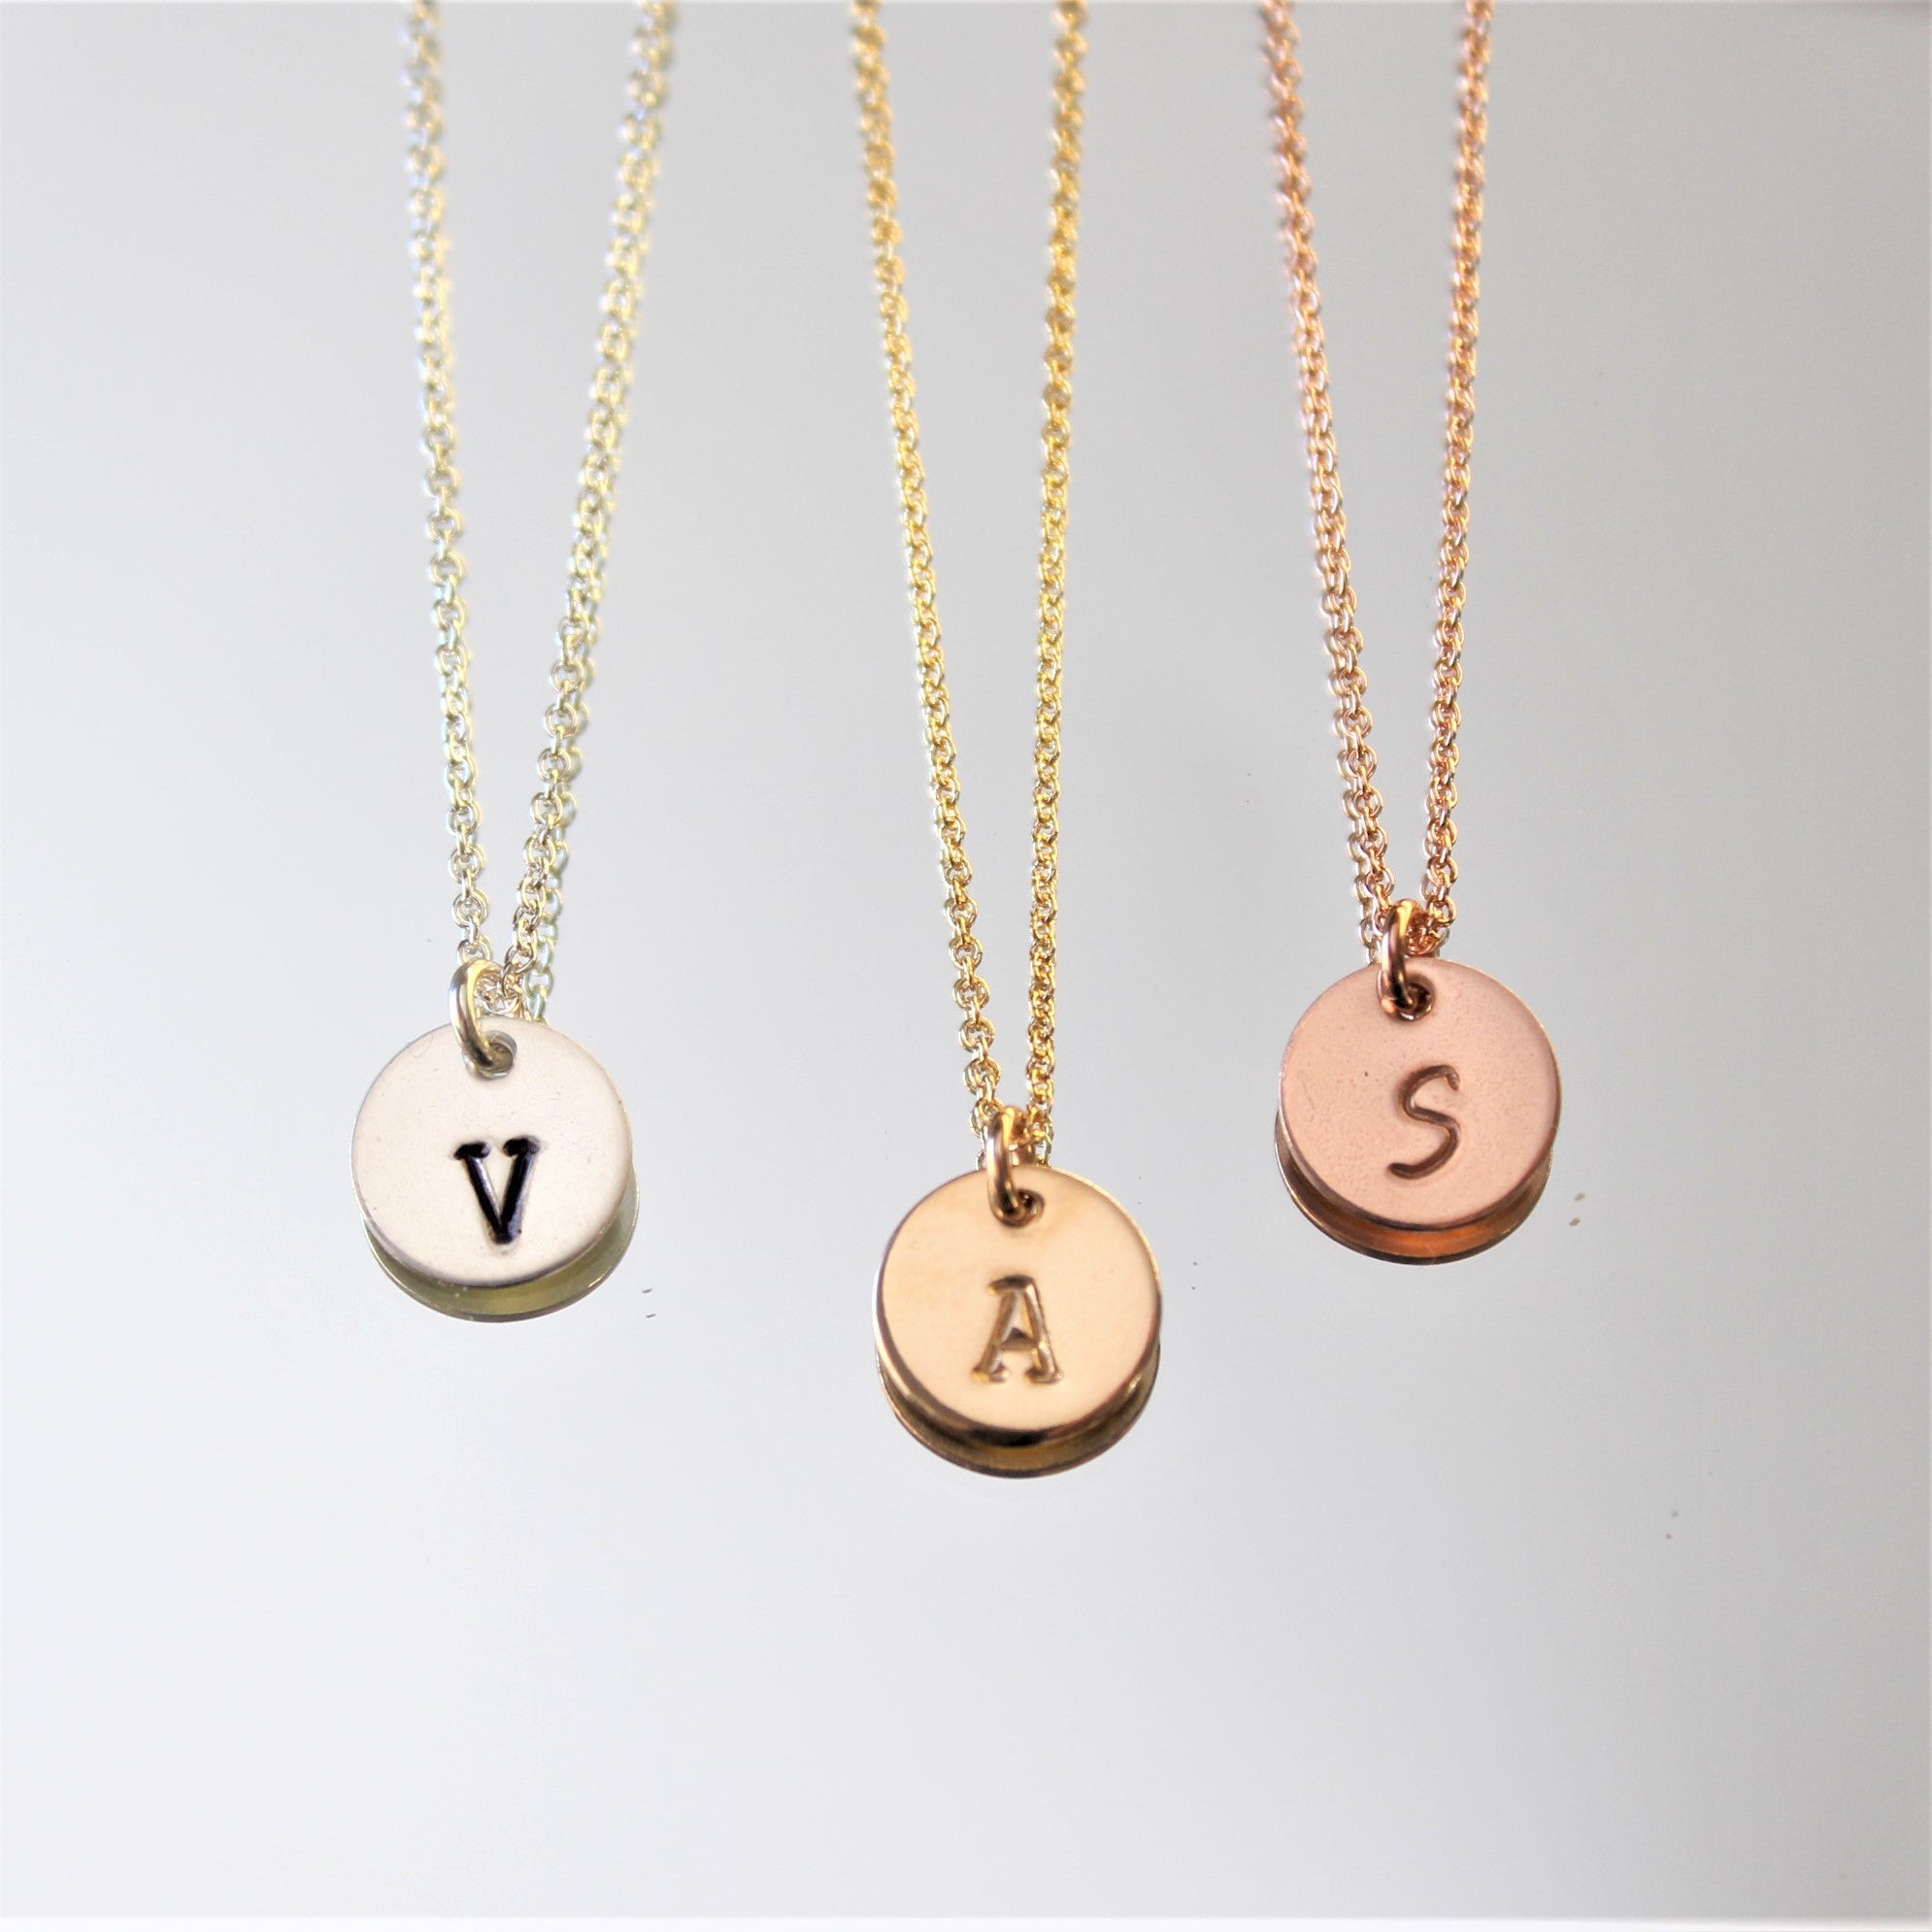 S Letter Necklace/ S Initial Chain Necklace/ Personalized 